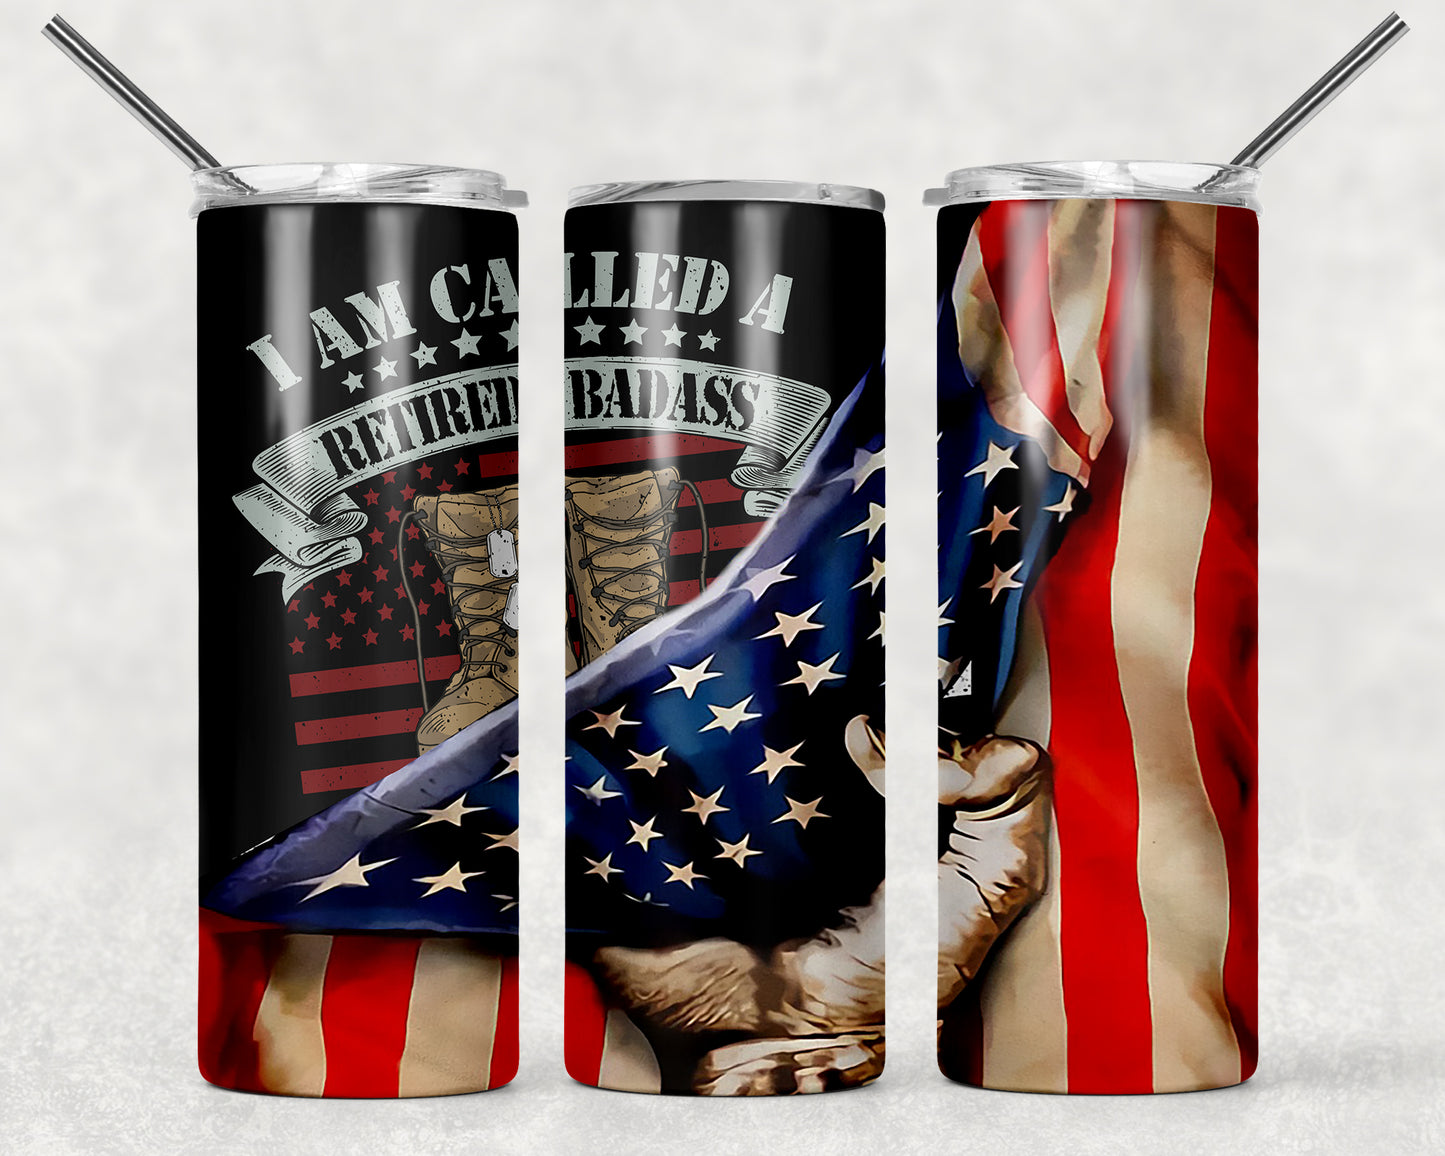 Retired Badass American Flag Sublimation Tumbler Wrap - Or Clear Waterslide Wrap